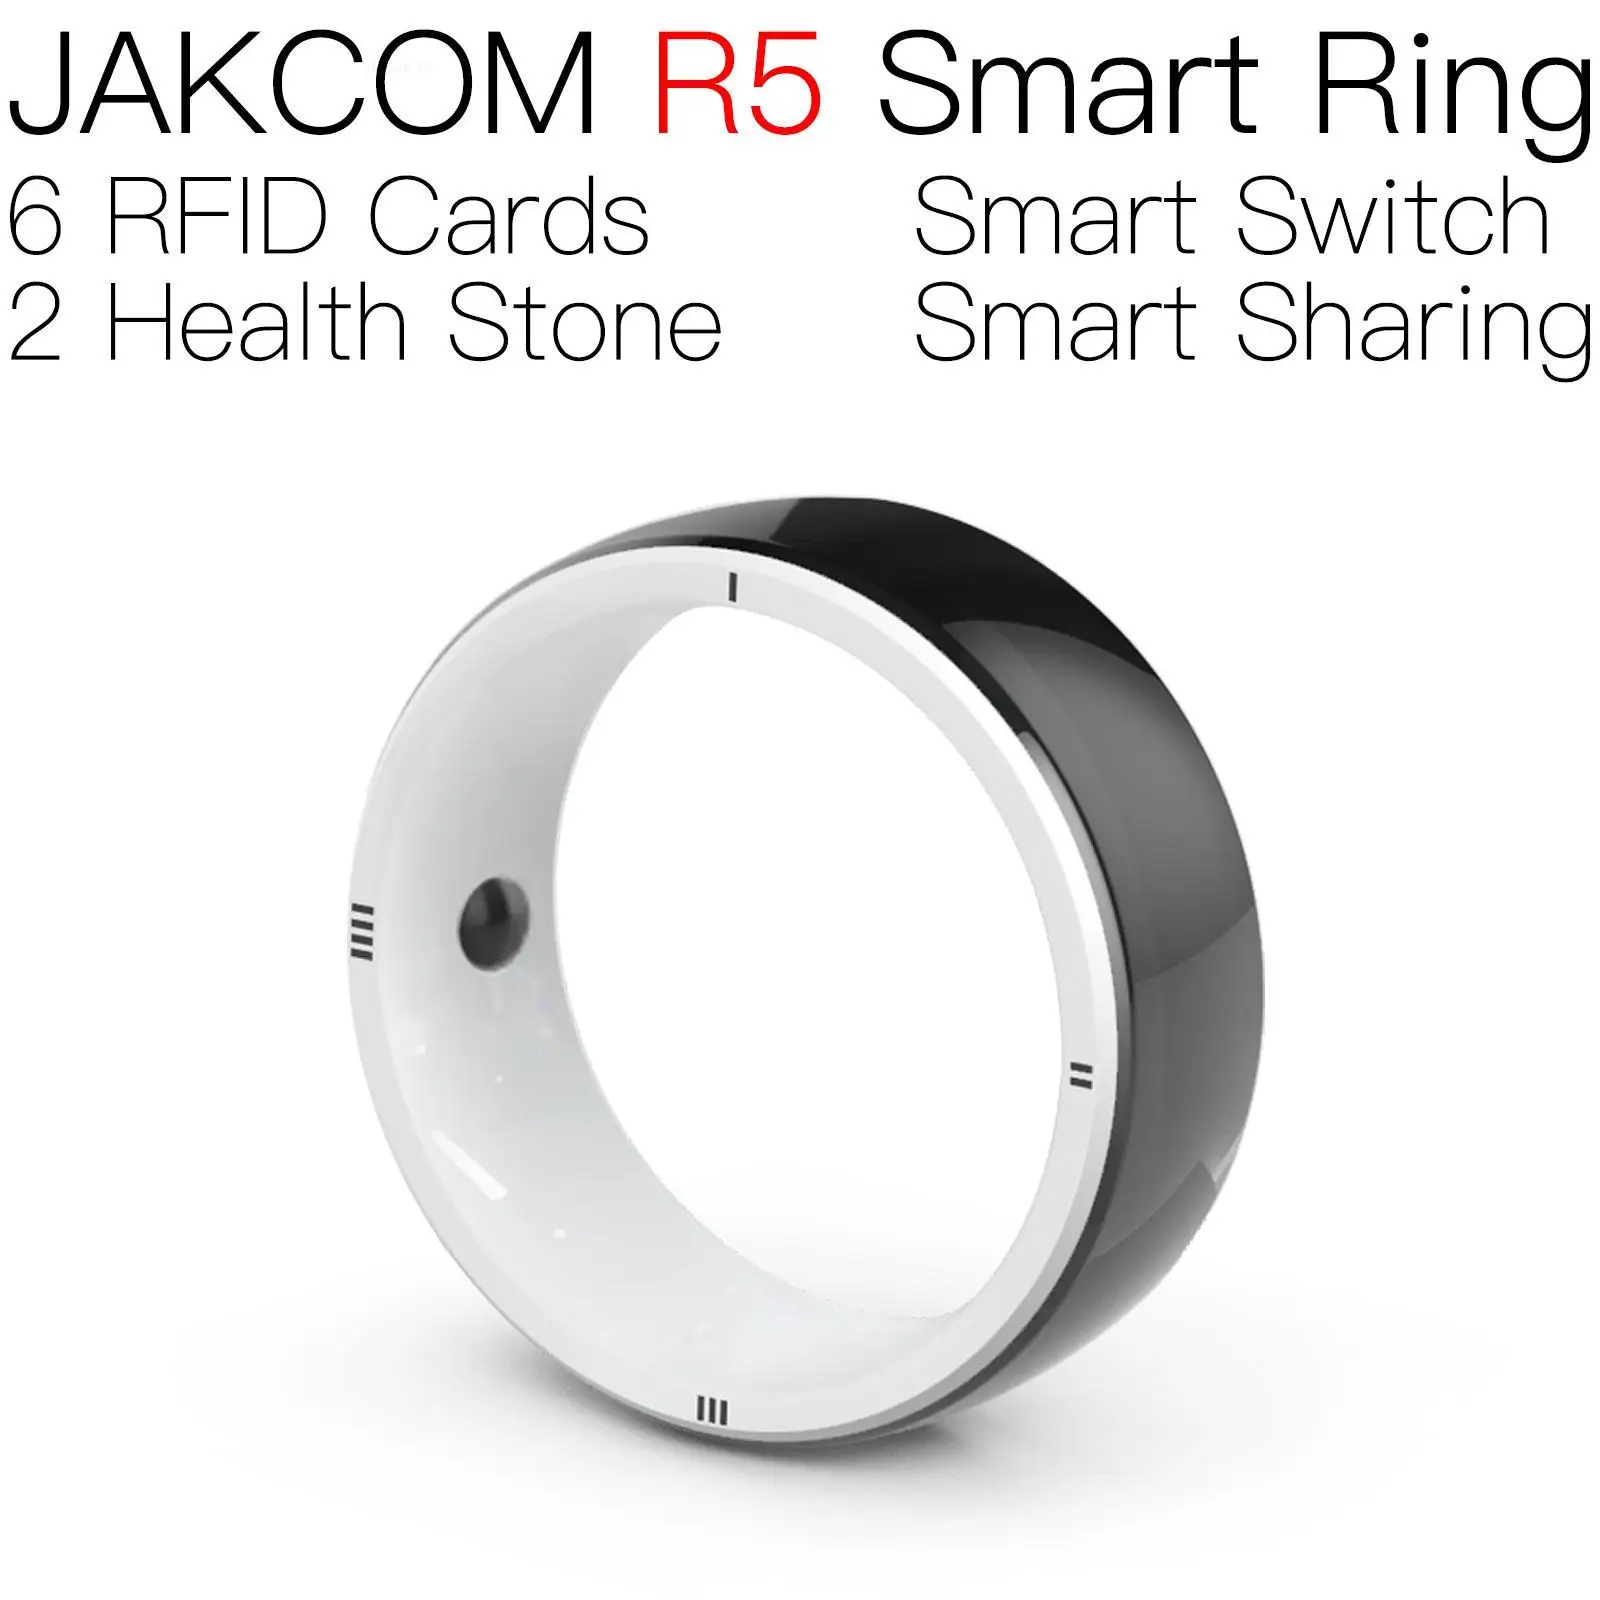 

JAKCOM R5 Smart Ring Super value than rfid em 4305 android nfc micro puce dual chip frequency khz bee mite atm card holder code